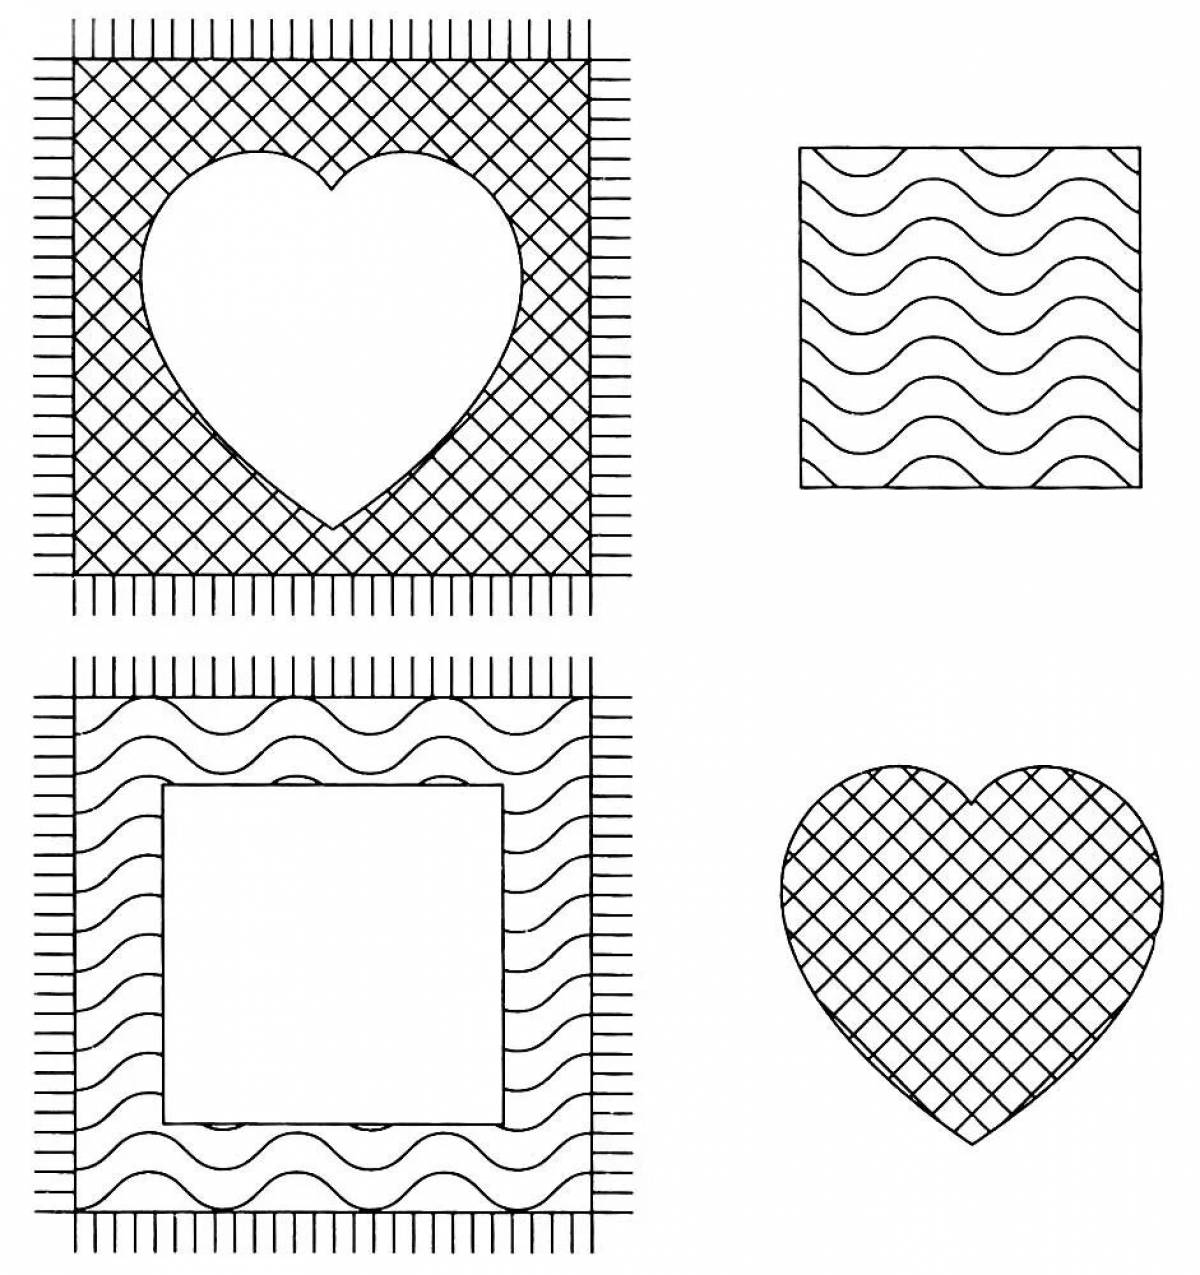 Coloring page adorable carpet for kids